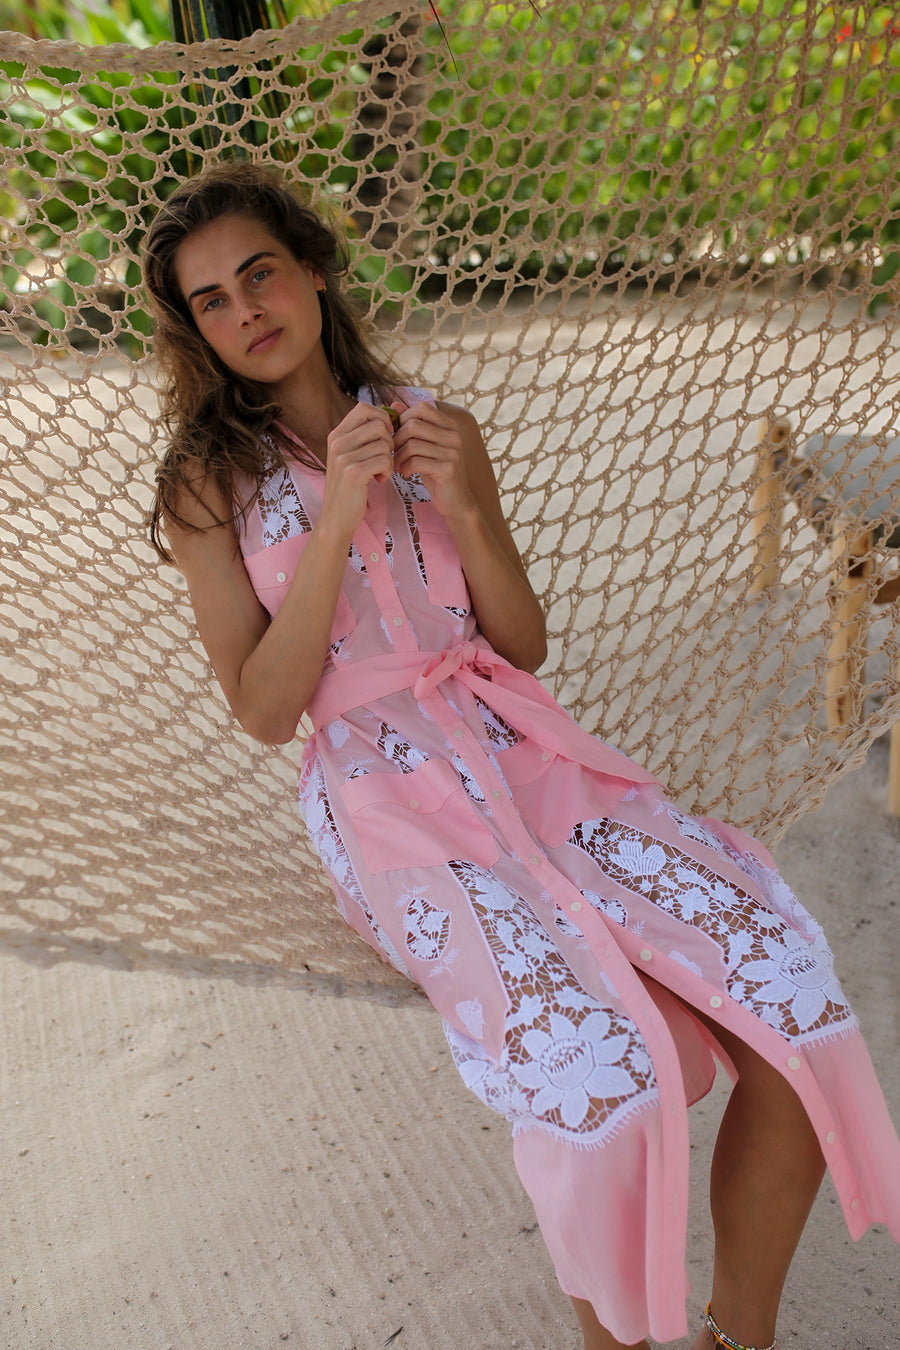 This photo shows a woman laying on a hammock wearing a bubblegum pick dress with lace detailing and pockets.